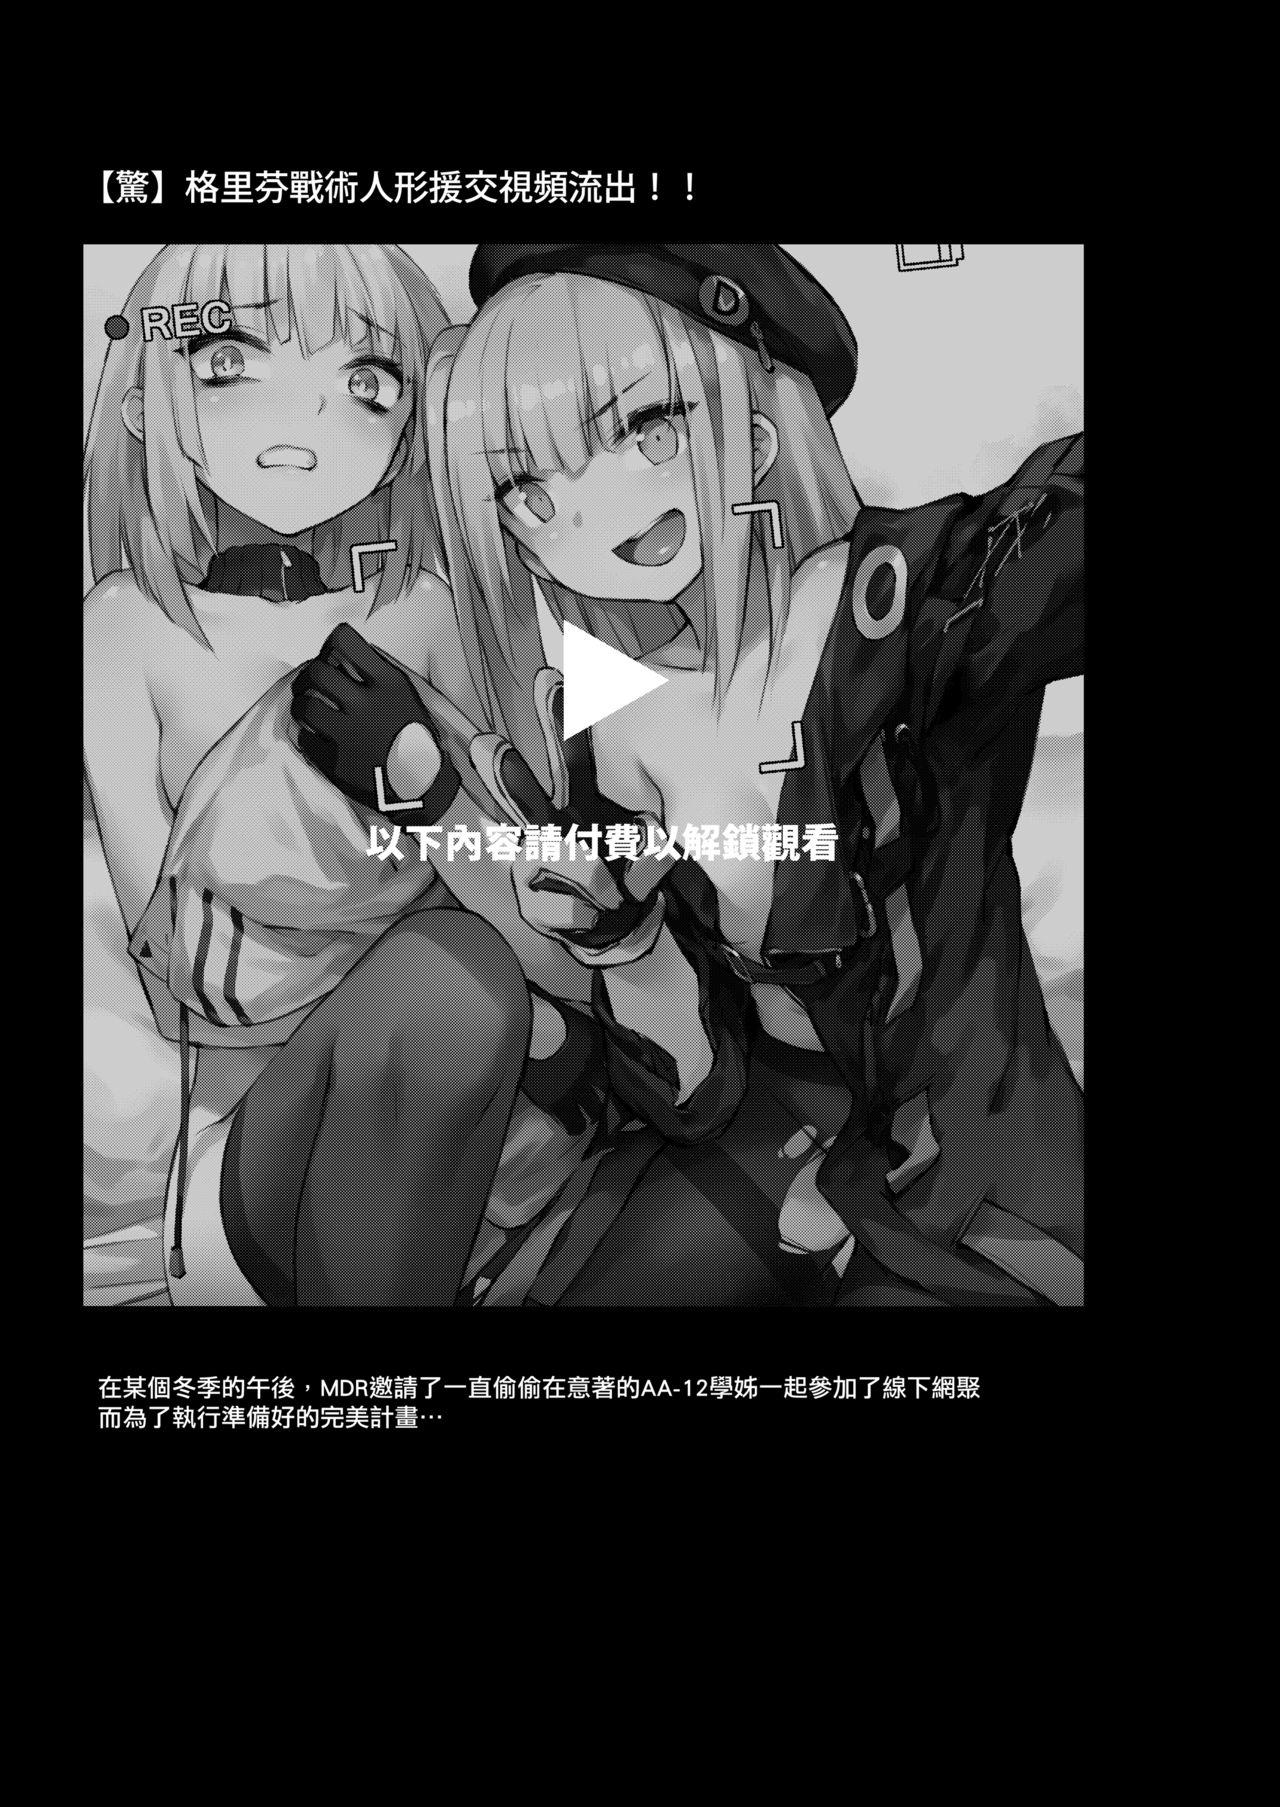 Milf A Video of Griffin T-Dolls Having Sex For Money Just Leaked! - Girls frontline Hot Blow Jobs - Page 2